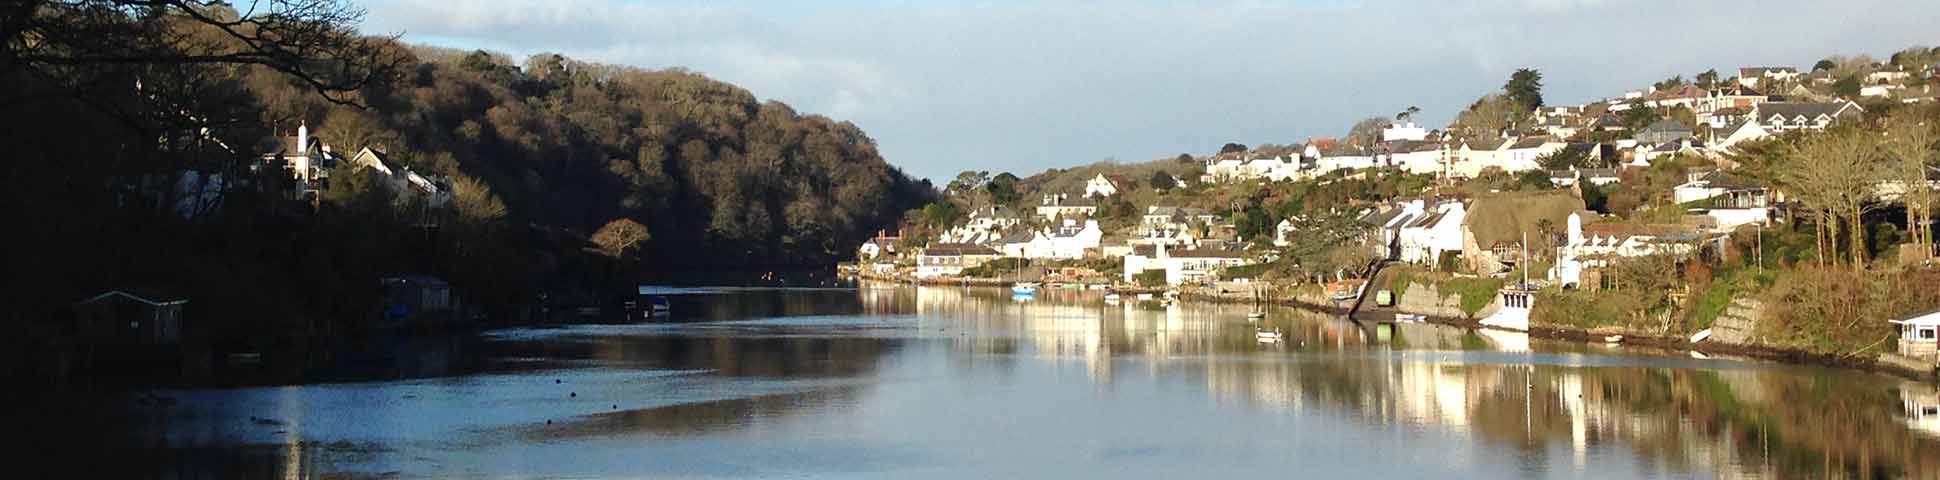 Noss Mayo Cottages